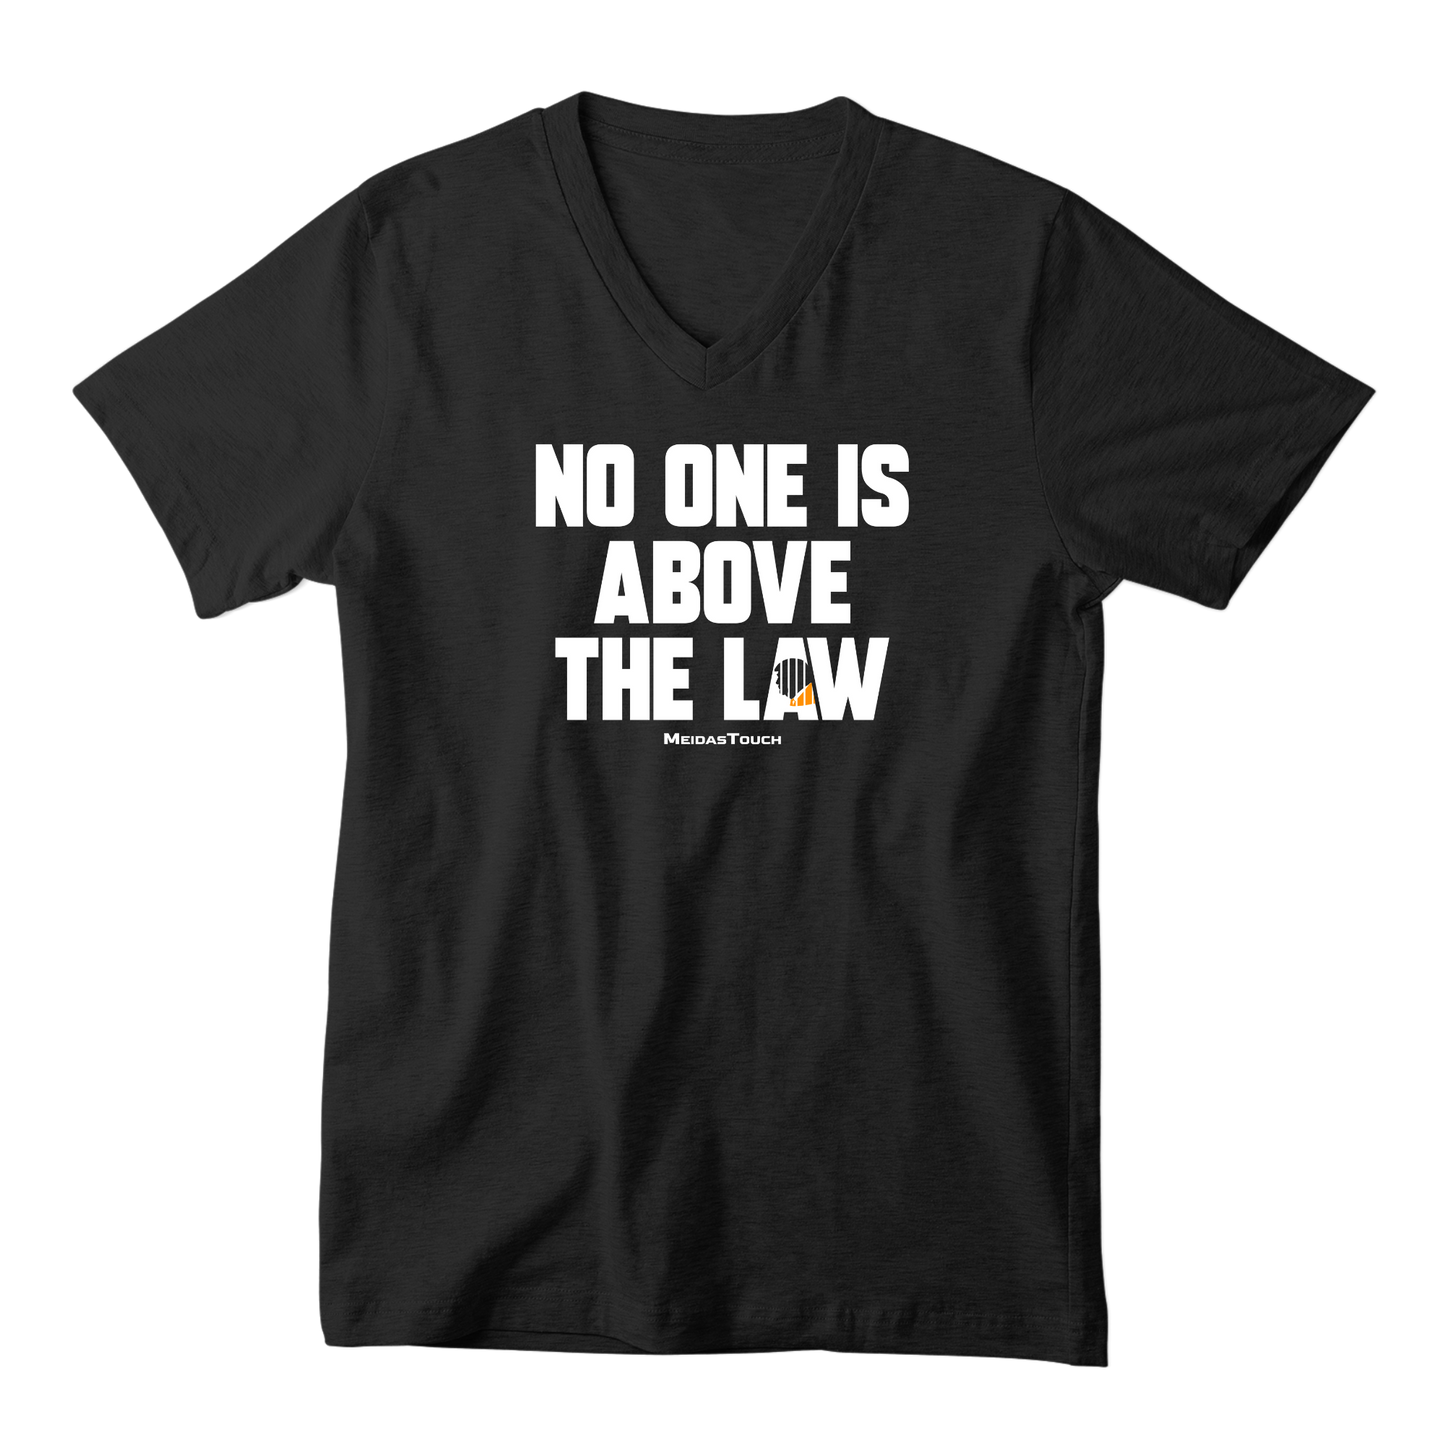 No One is Above the Law Tee